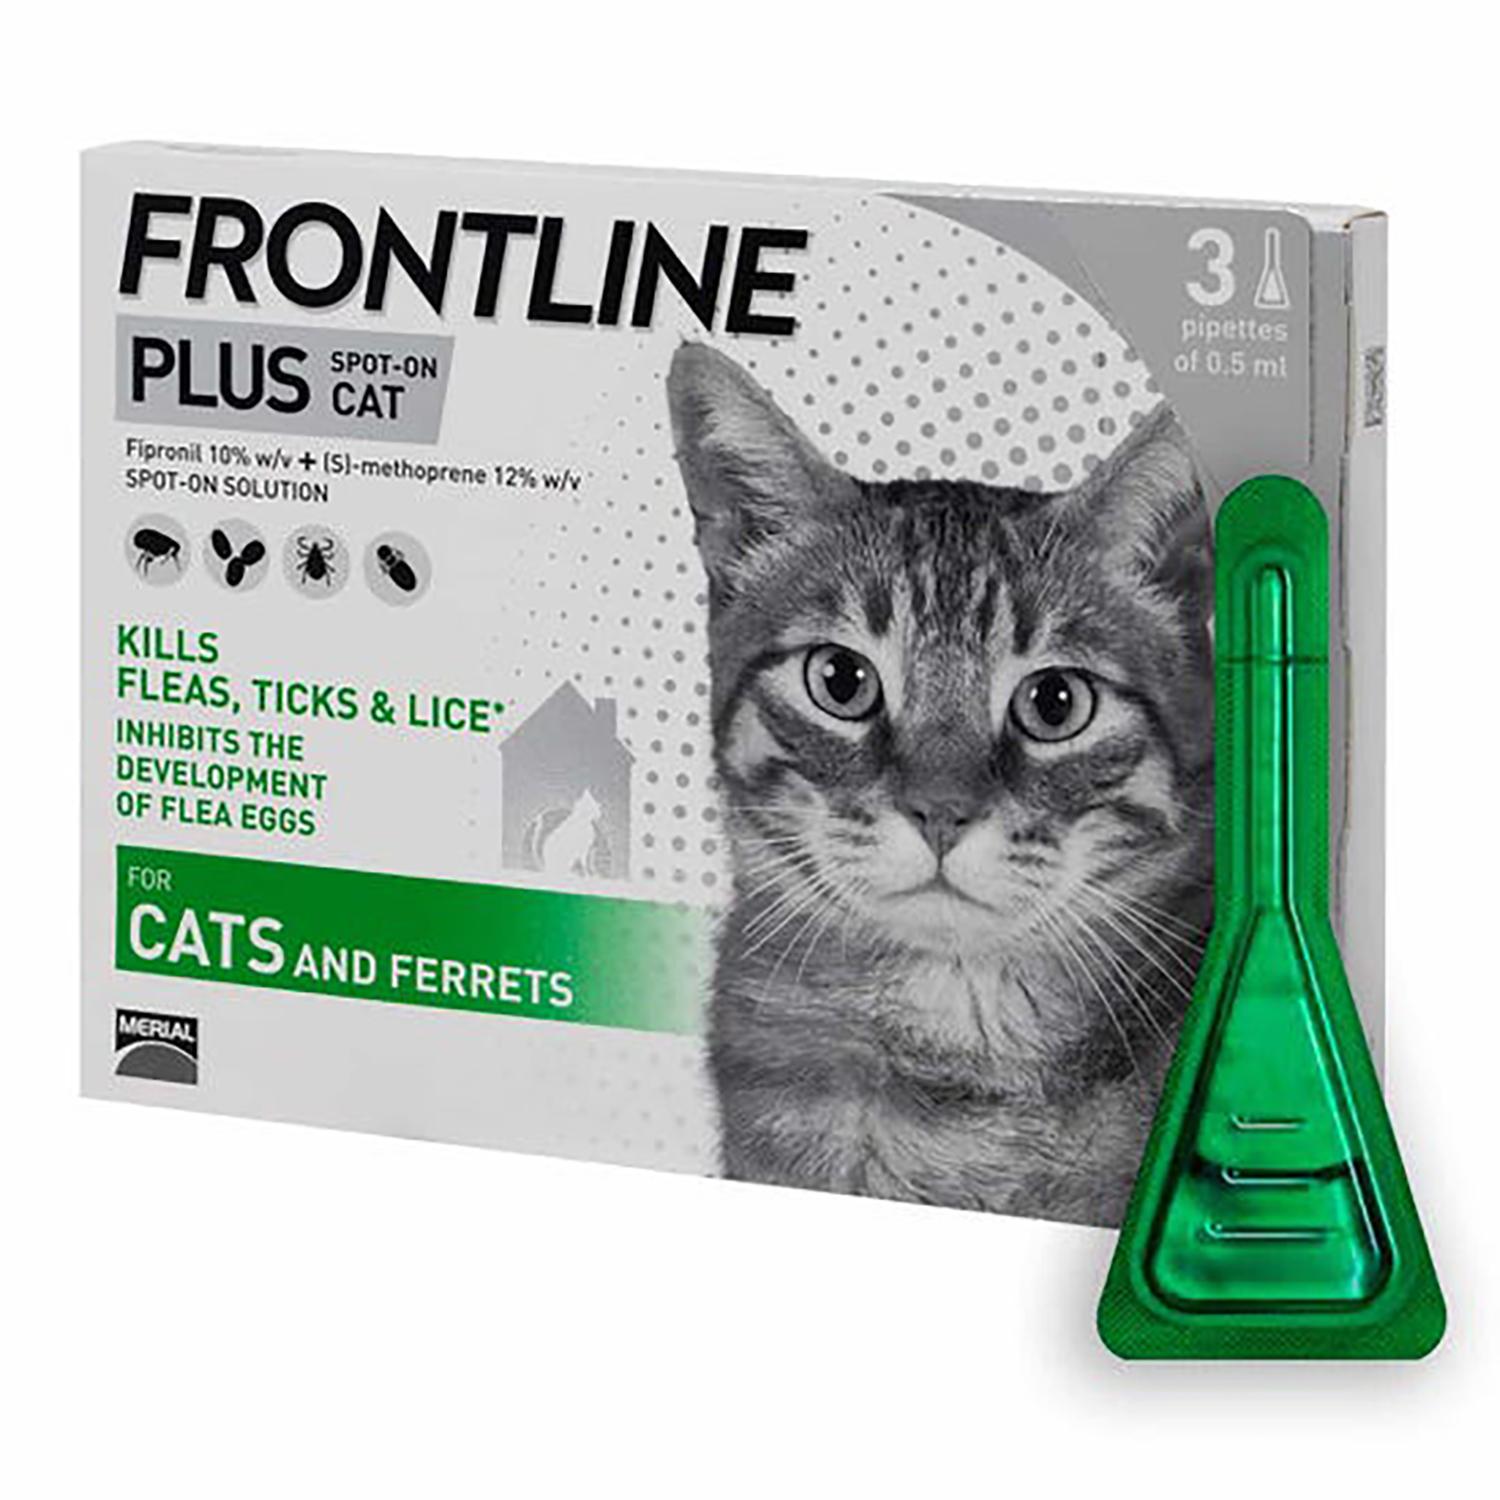 Frontline spot on for cats